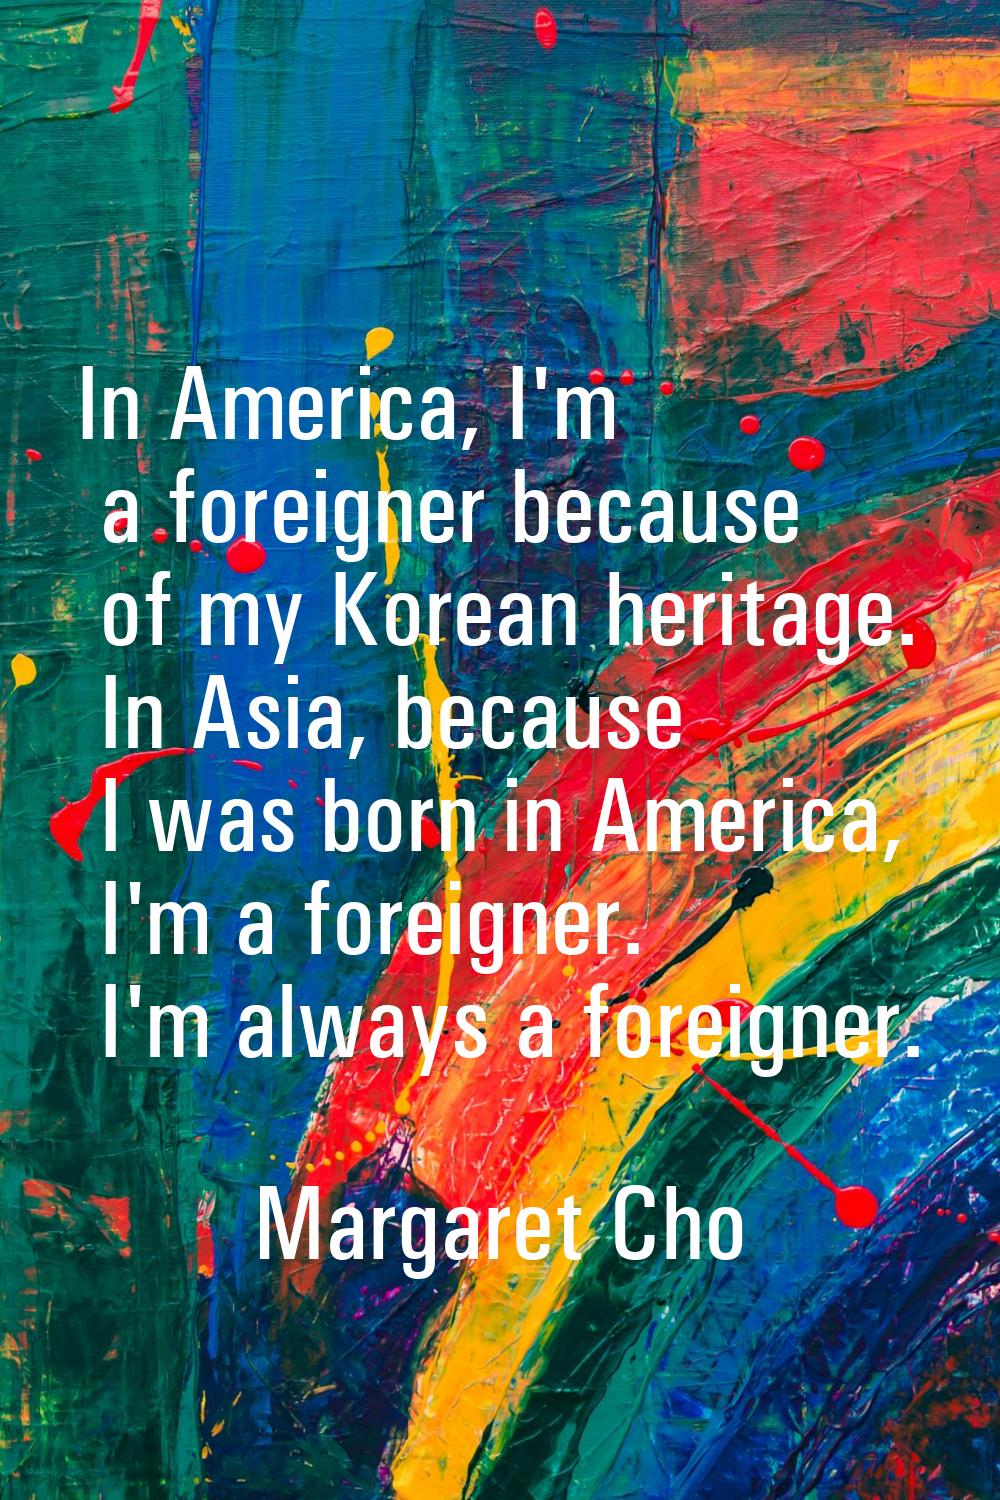 In America, I'm a foreigner because of my Korean heritage. In Asia, because I was born in America, 